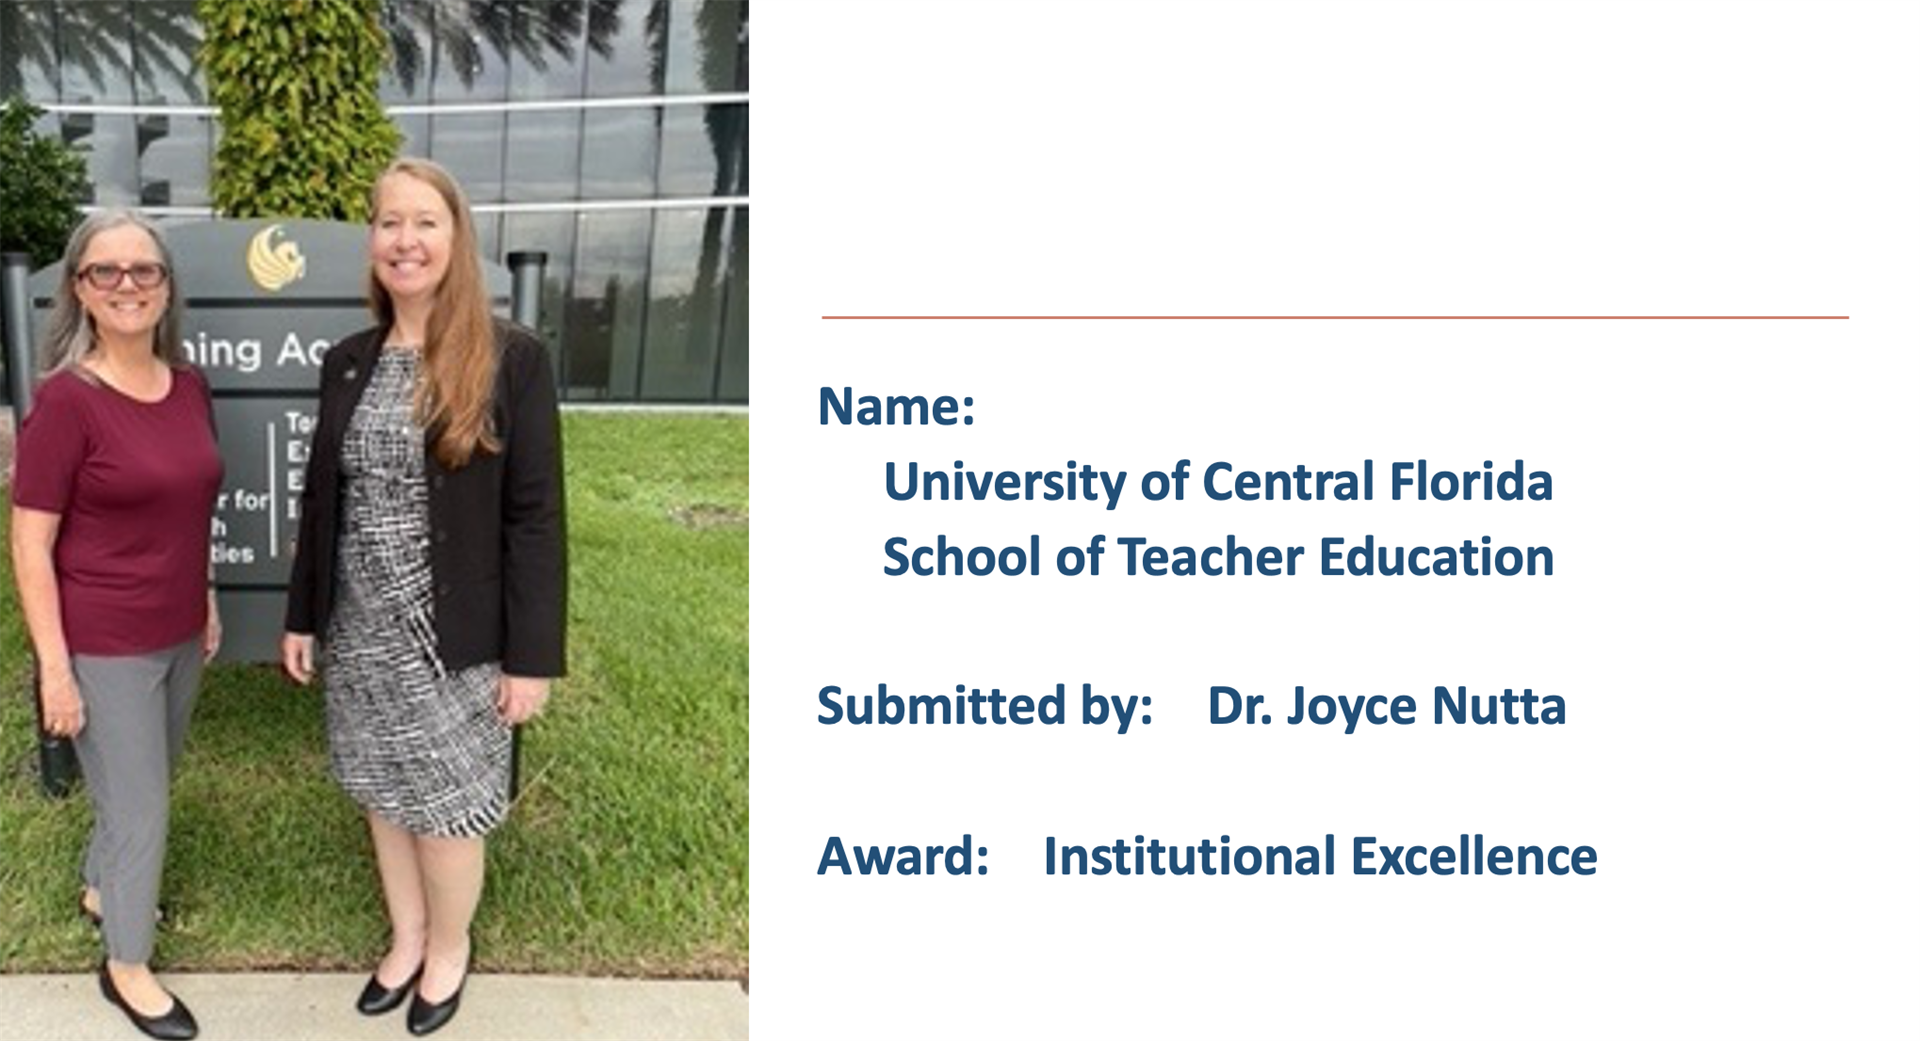 University of Central Florida School of Teacher Education, submitted by Dr. Joyce Nutta. Awarded the Institutional Excellence Award.